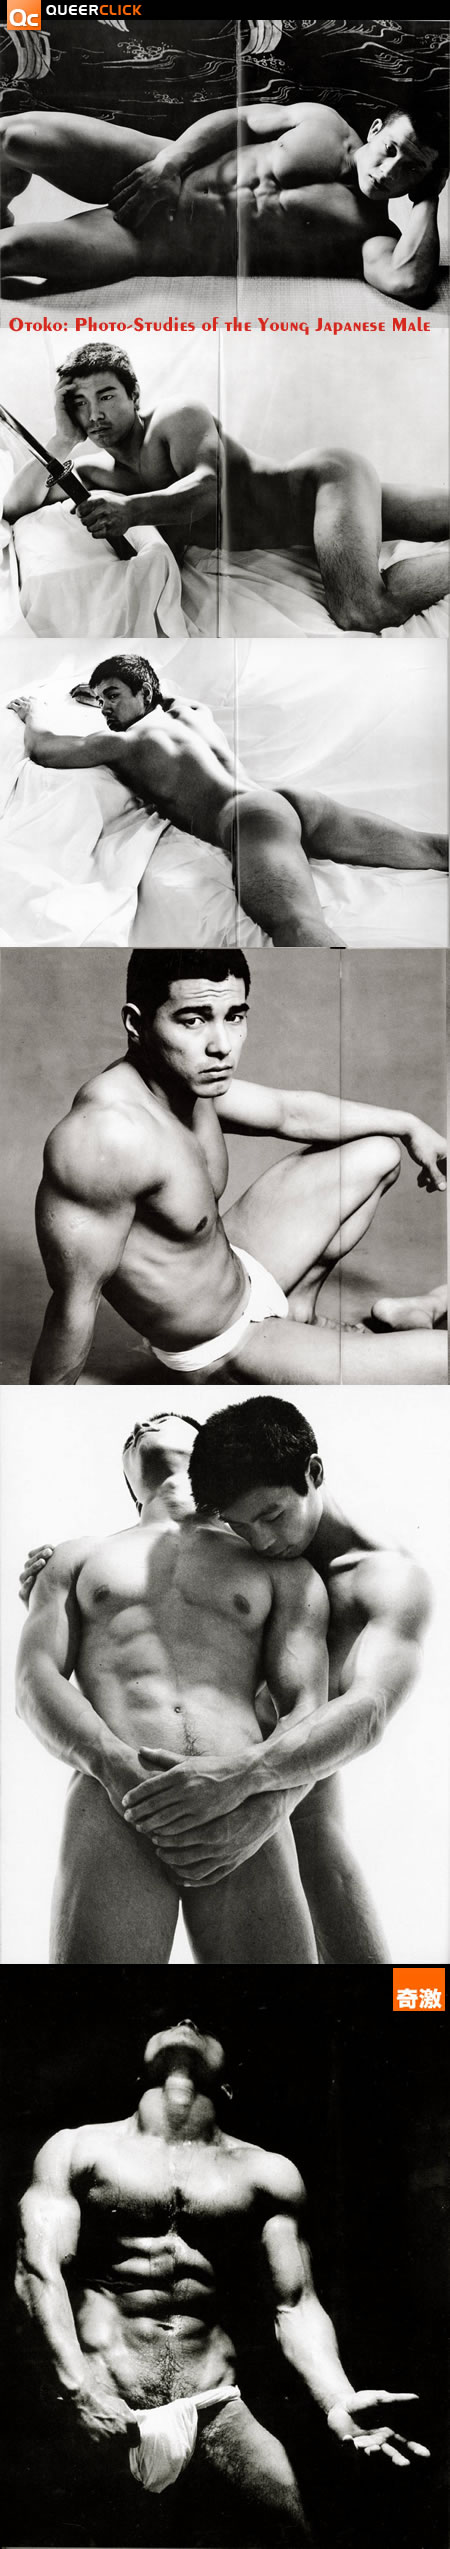 Otoko: Photo-Studies of the Young Japanese Male